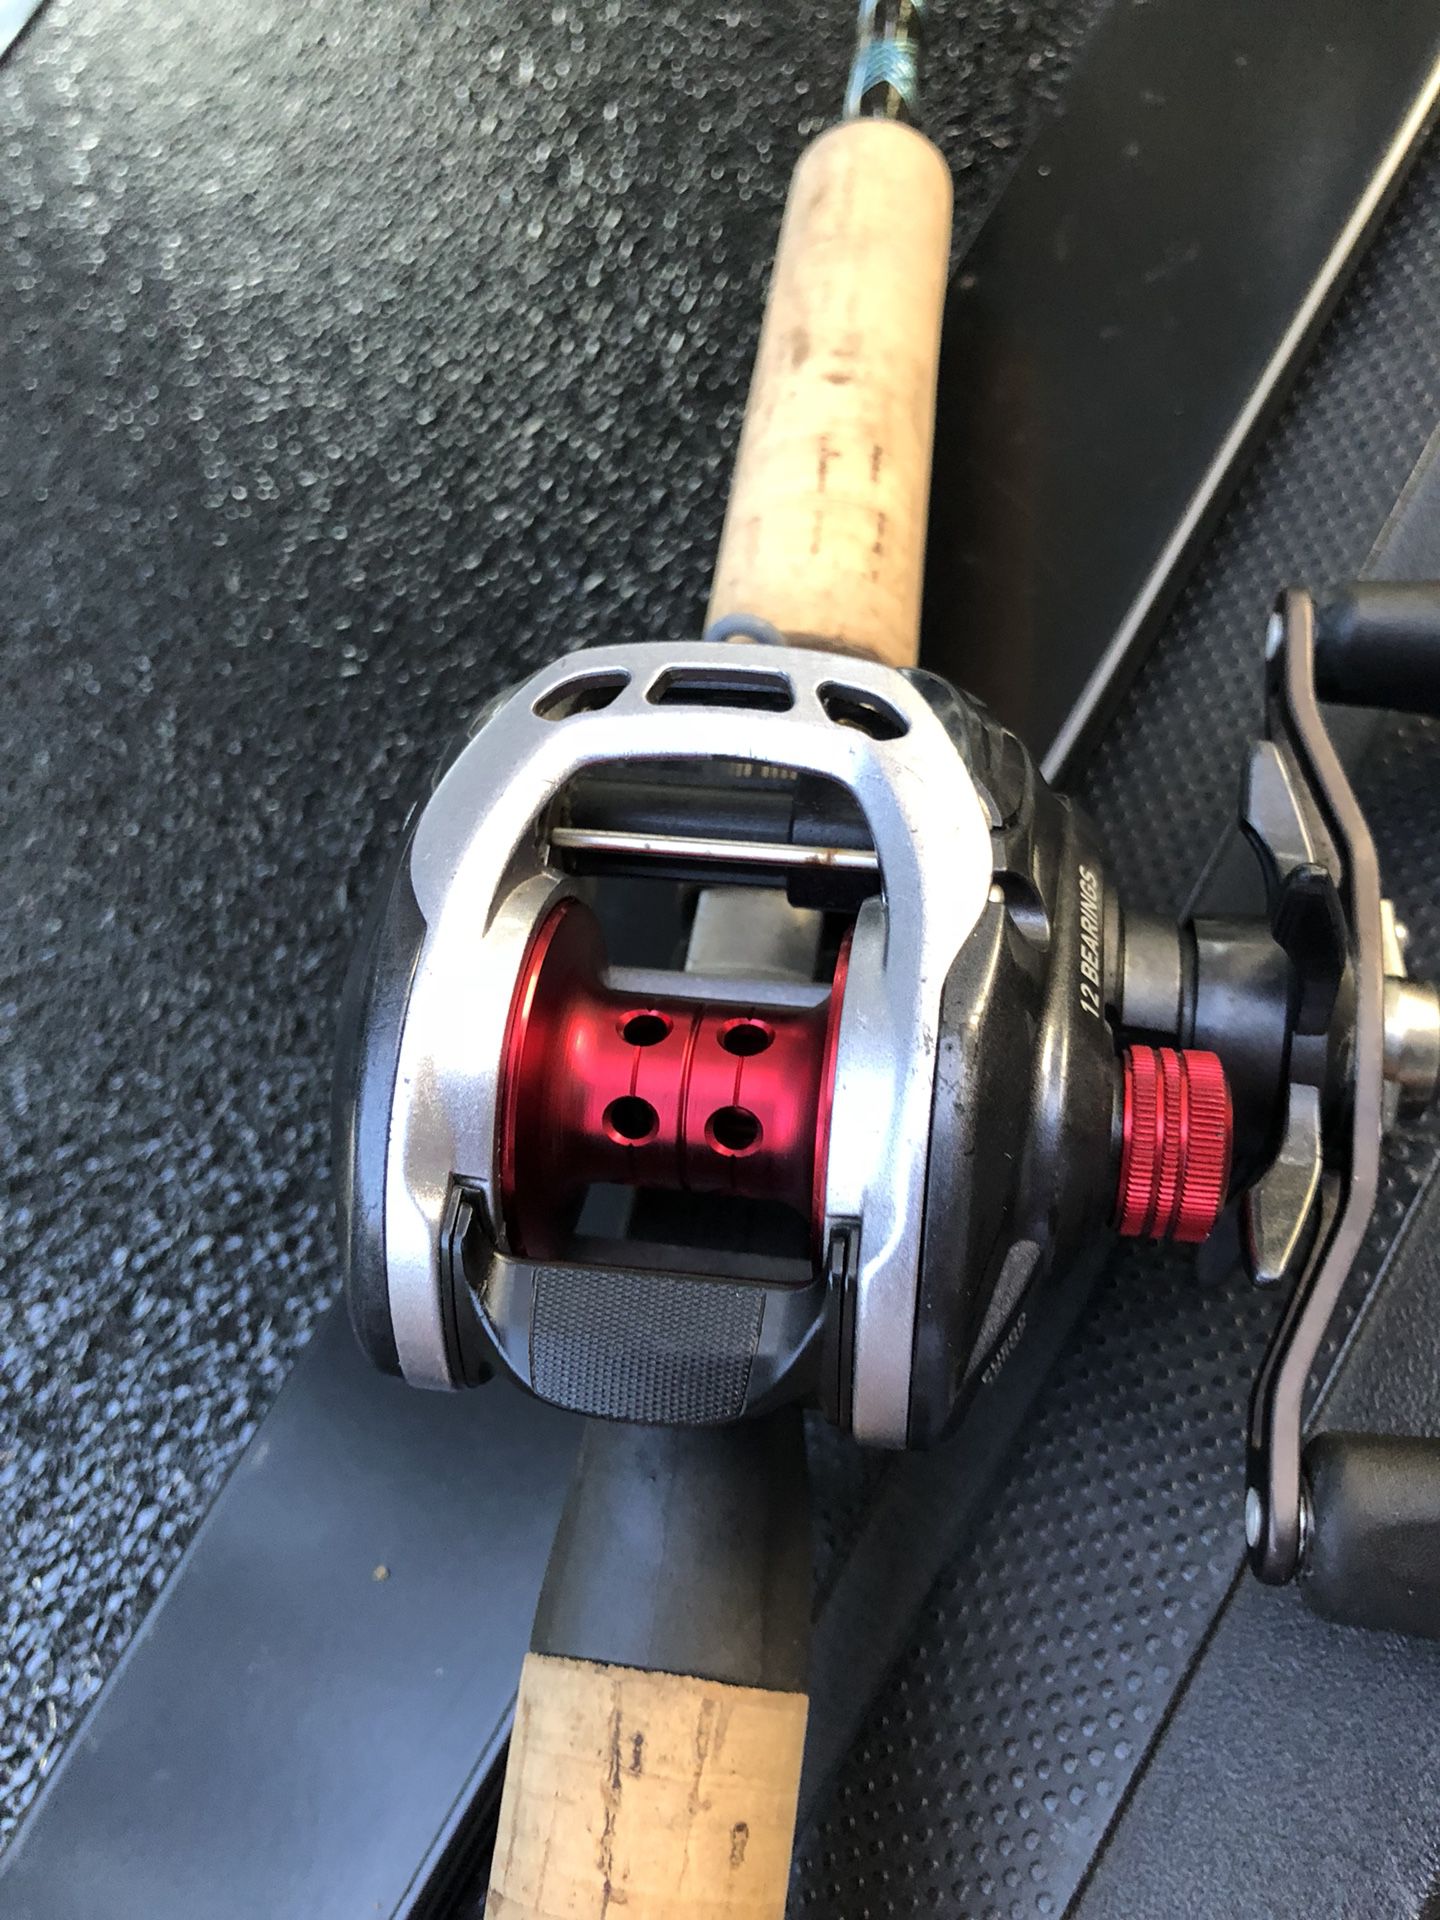 Daiwa Fuego 100hs 7.3 Fishing Reel and Castaway slx3 saltwater light  casting rod 7' aslclh7 for Sale in Houston, TX - OfferUp